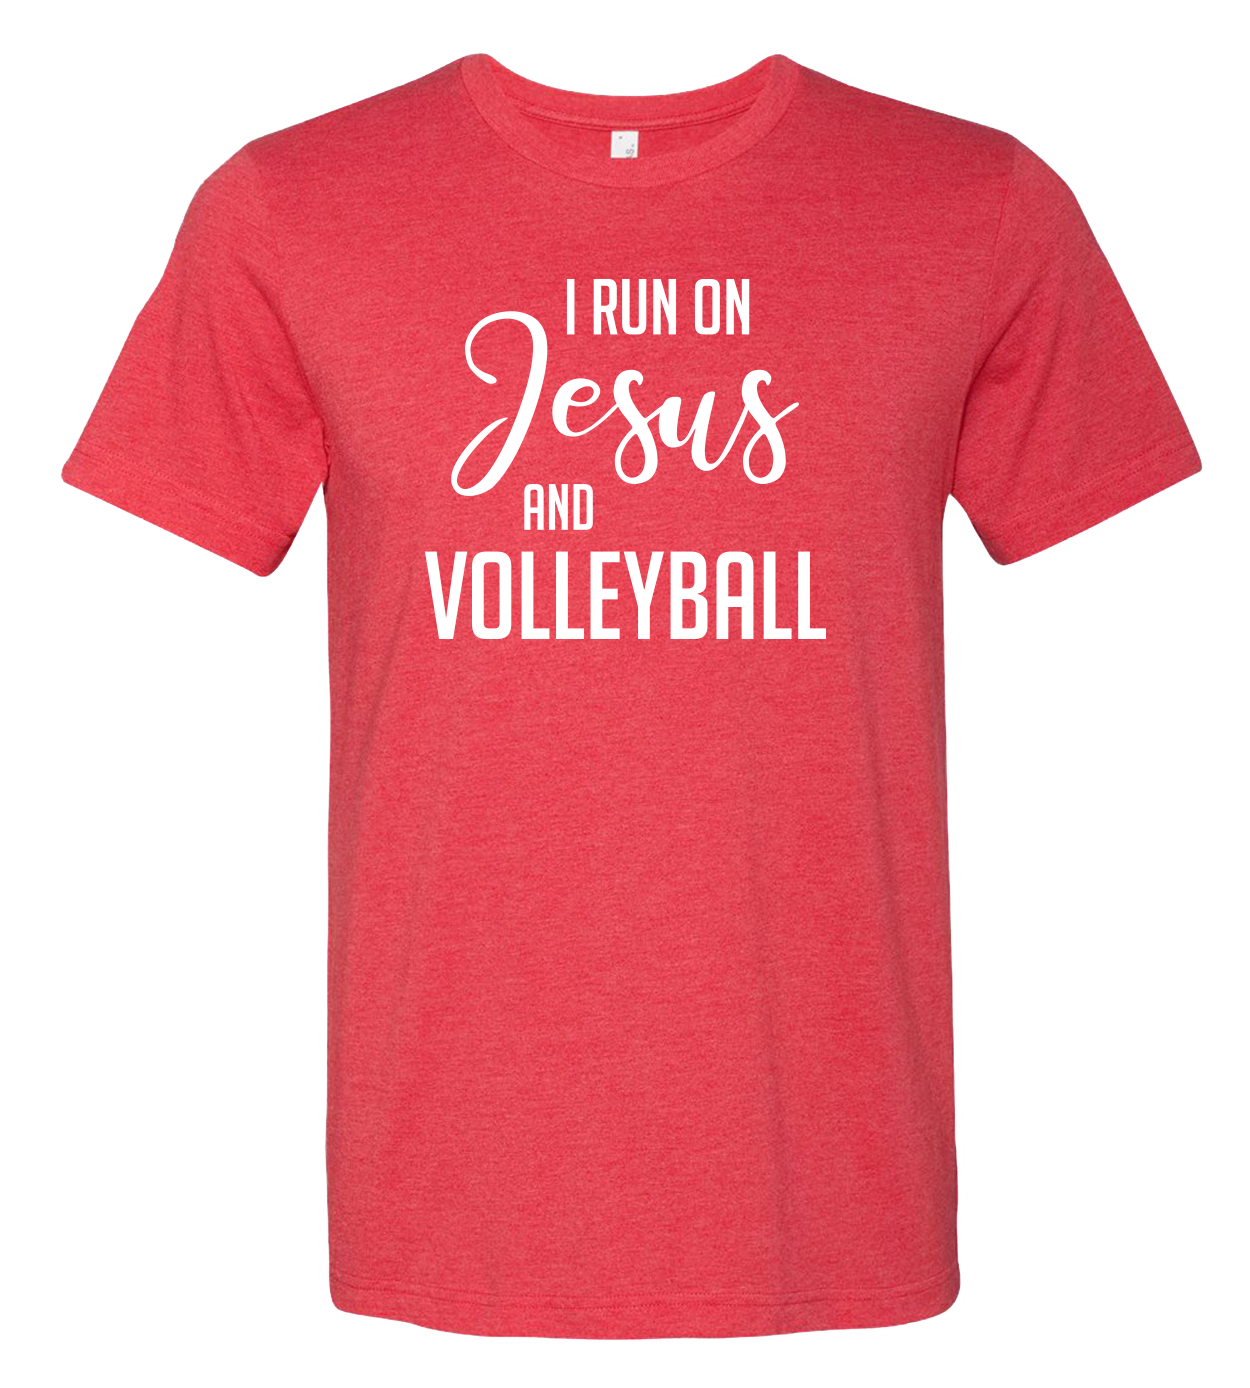 I Run on Jesus T-Shirt  (more colors available)